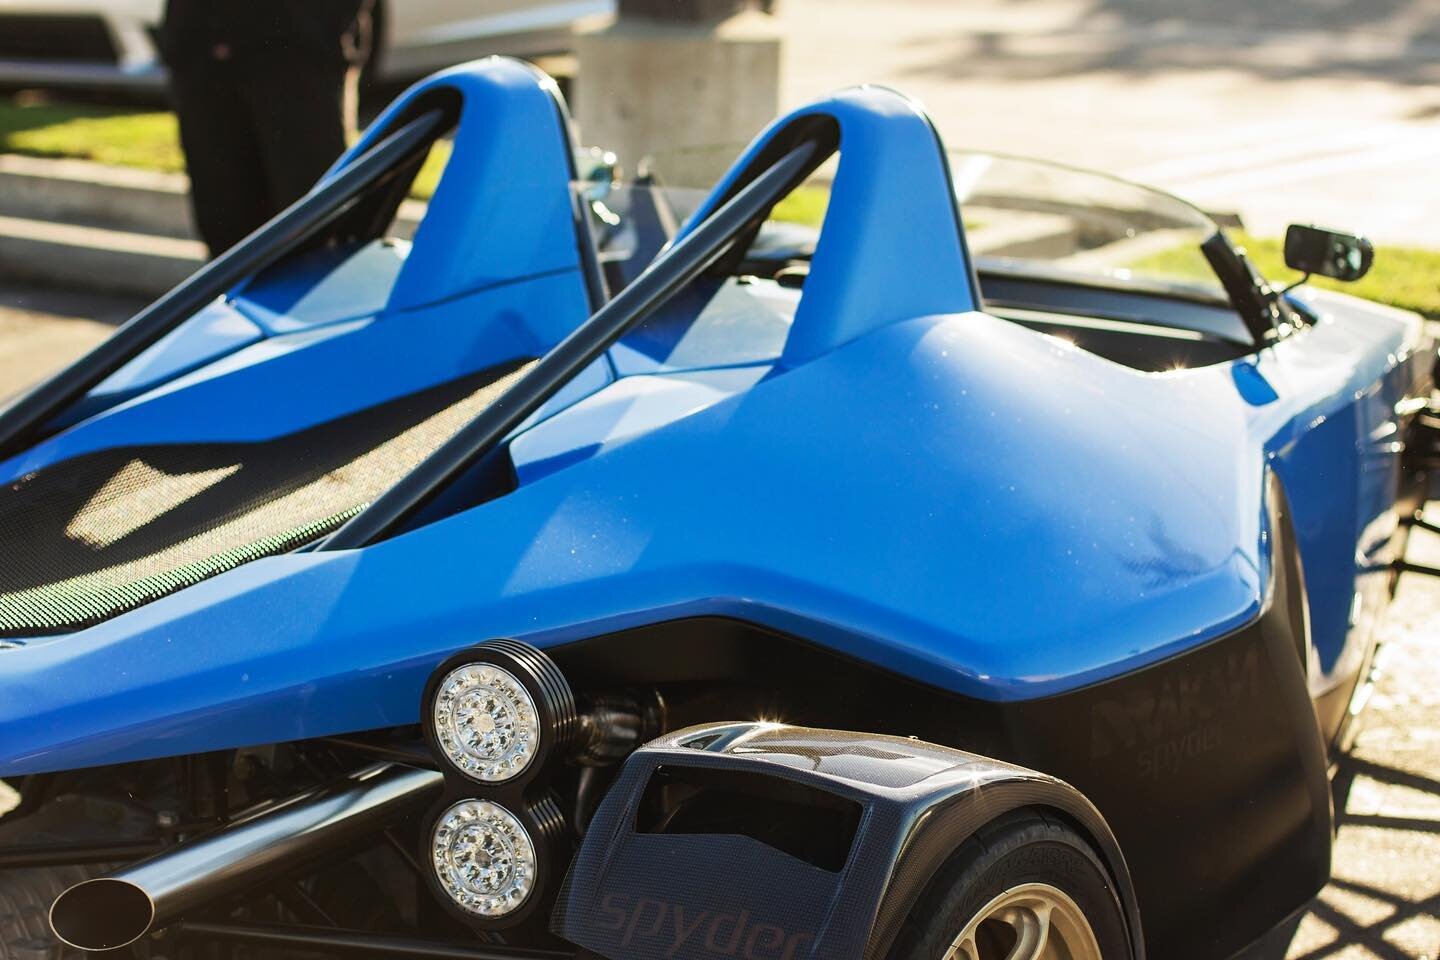 #tbt to when the Drakan Spyder was featured in an episode of Jay Leno&rsquo;s Garage. It&rsquo;s hard to believe this was half a decade ago! Drakan Spyder&rsquo;s design was a collaborative effort between Sector 111 and our team here at Zukun. We des